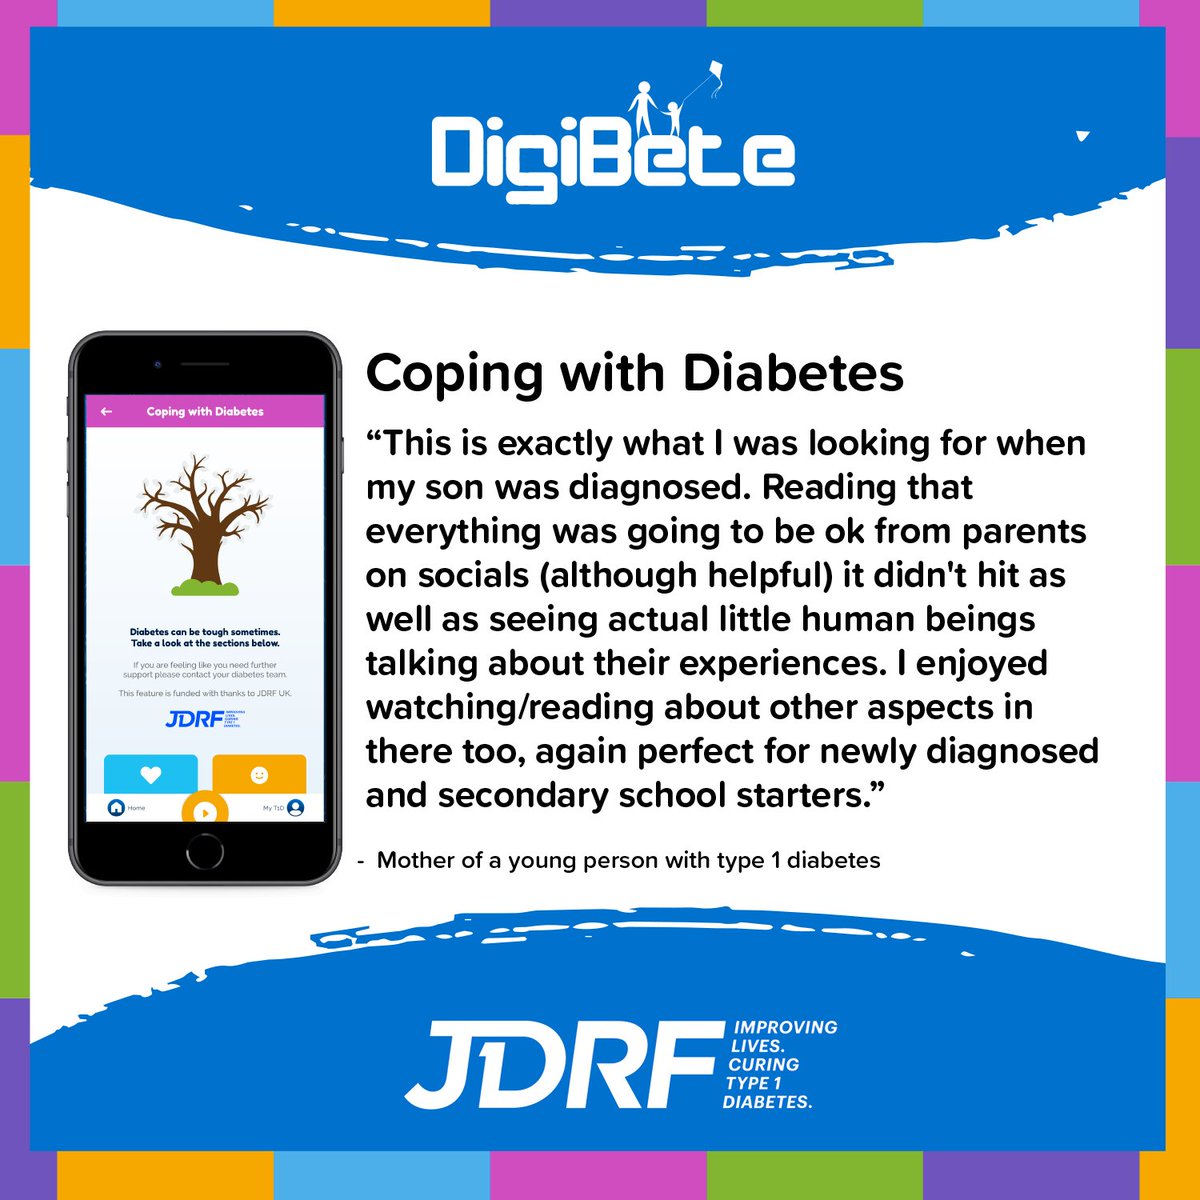 This week we have launched the Coping with Diabetes button which aims to support young people from the ages of 10 to 14 years old with type 1 diabetes. Today we wanted to share one of the parent’s thoughts about this button in supporting their son on his type 1 diabetes journey…